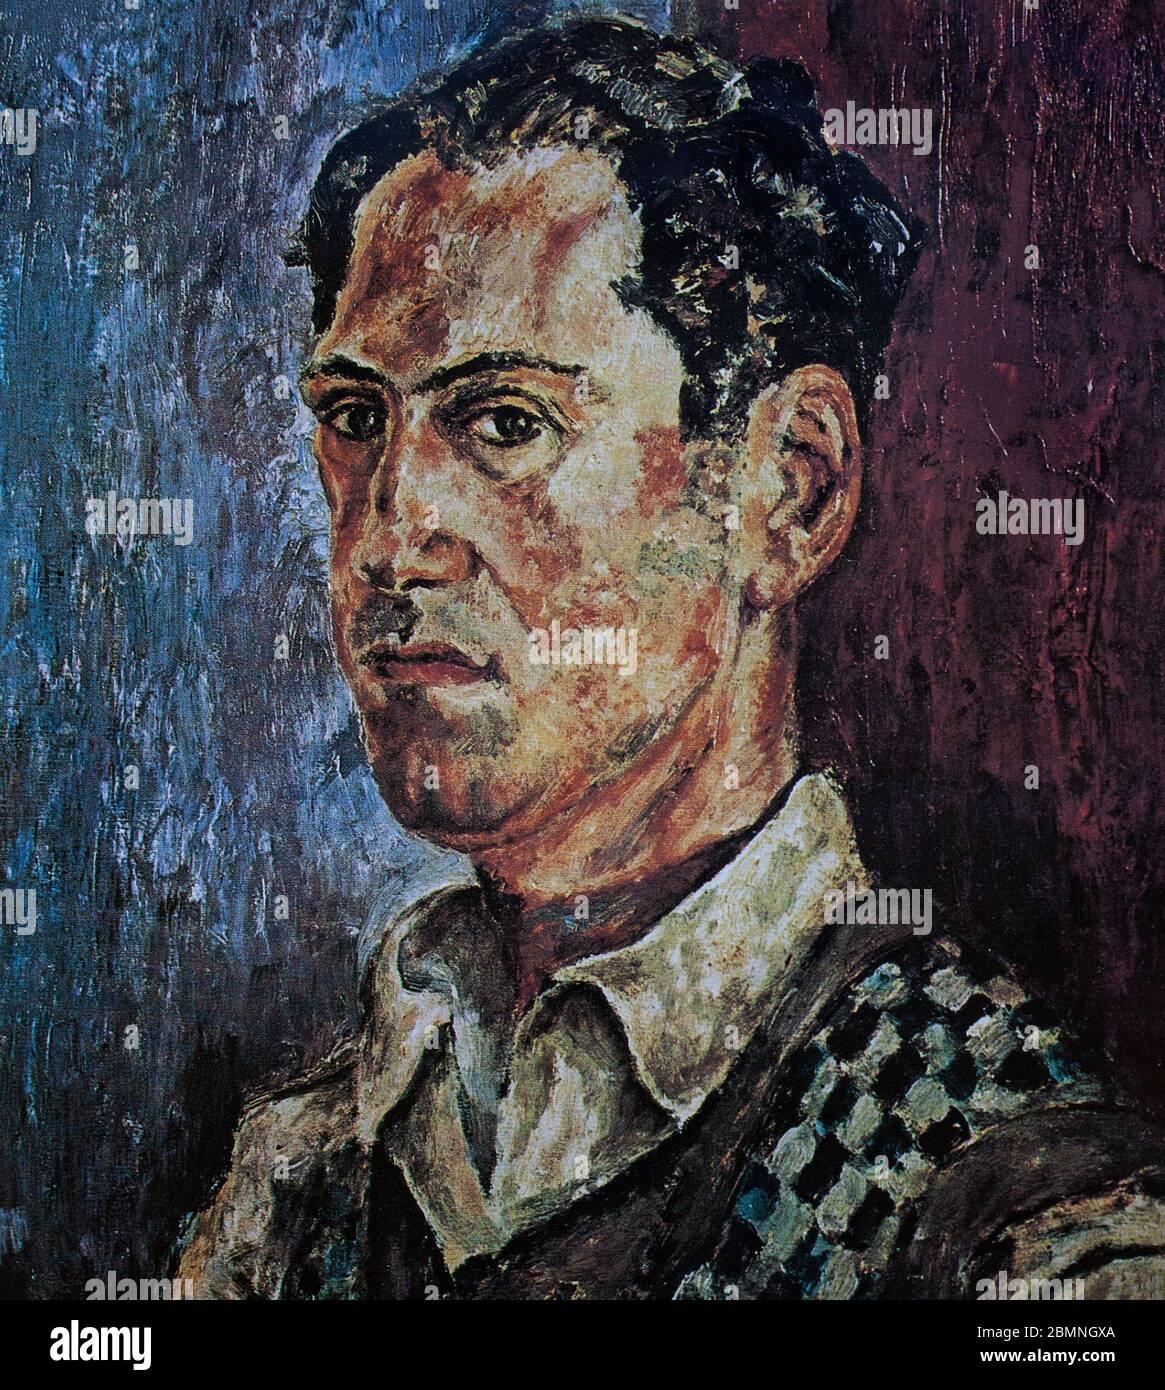 Self Portrait by George Gershwin (1898-1937) was an American composer and pianist whose compositions spanned both popular and classical genres. Among his best-known works are the orchestral compositions Rhapsody in Blue (1924) and An American in Paris (1928) and the opera Porgy and Bess (1935) which spawned the hit Summertime. Stock Photo